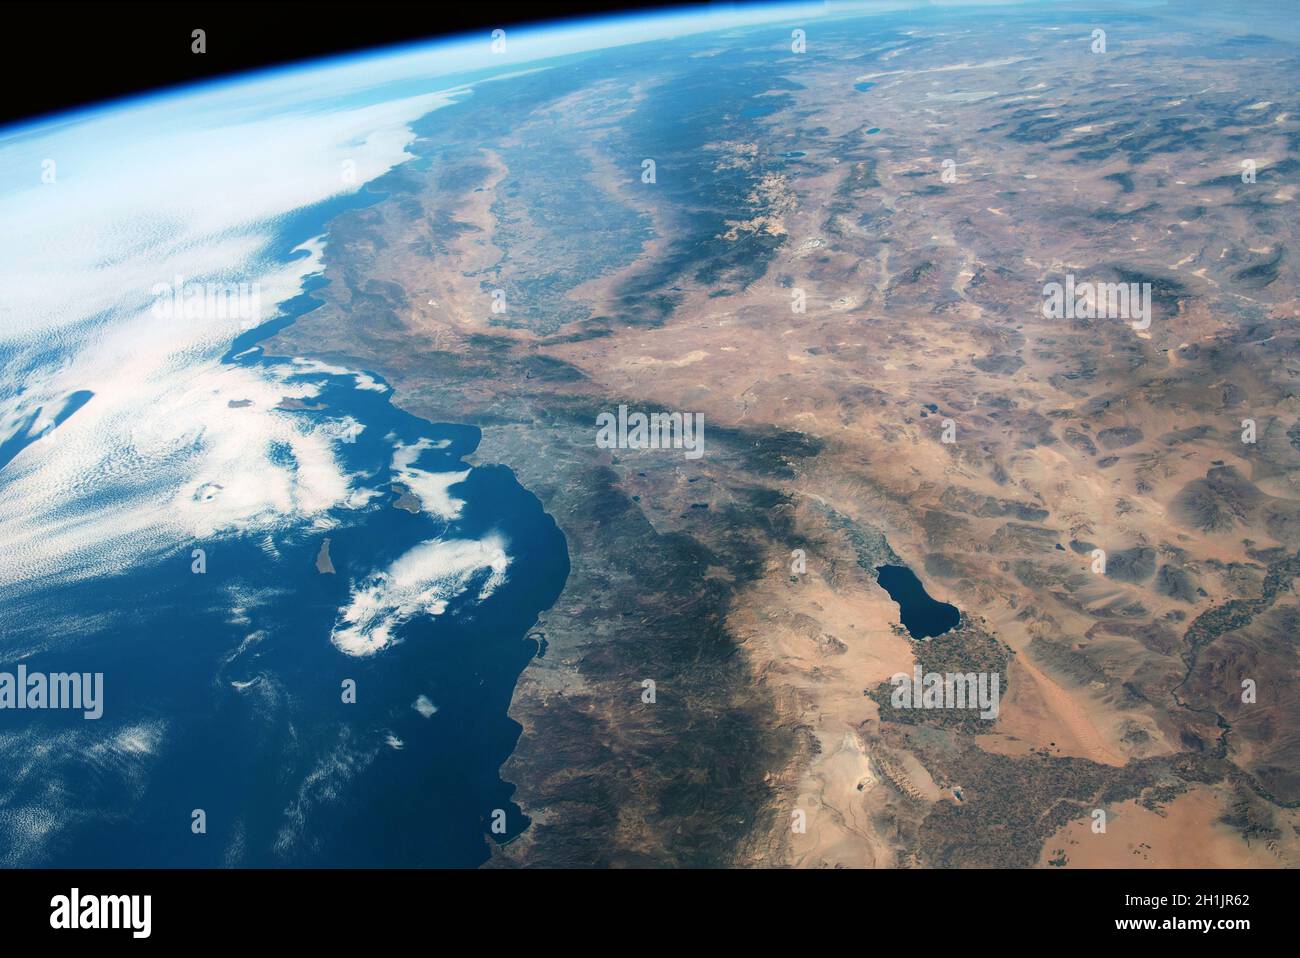 The Earth seen from the International Space Station: USA-CALIFORNIA Featuring: BAKERSFIELD, RIVERSIDE, SAN DIEGO, LAS VEGAS, LOS ANGELES, VICTORVILLE, Salton Lake.  4 November 2019.  An optimised and enhanced version of a NASA image / credit NASA. Stock Photo